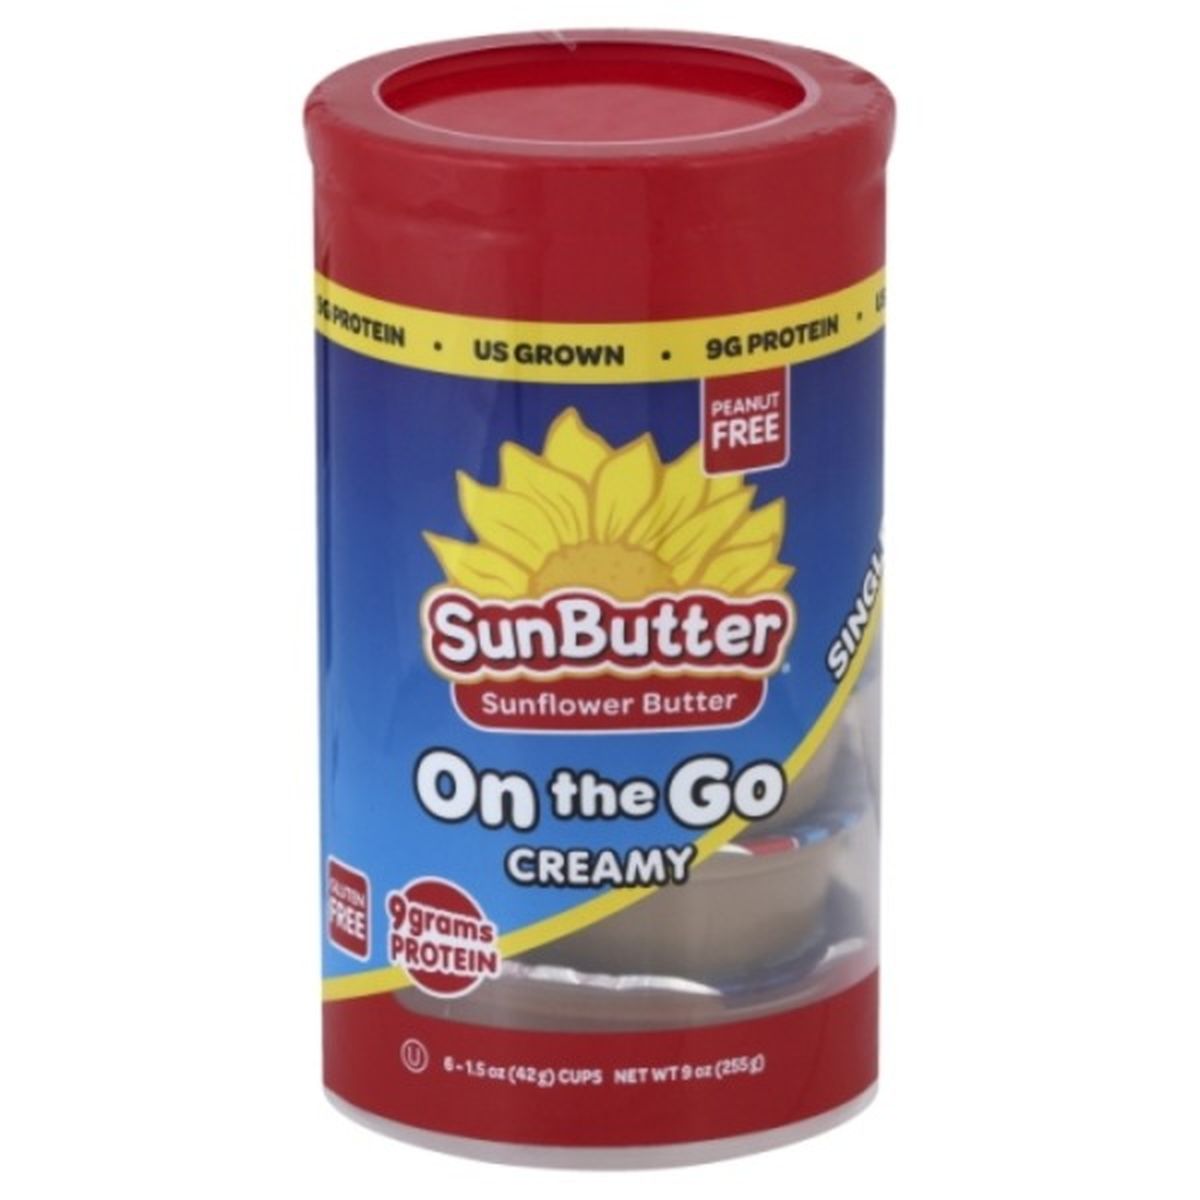 Calories in SunButter Sunflower Butter, Creamy, On the Go